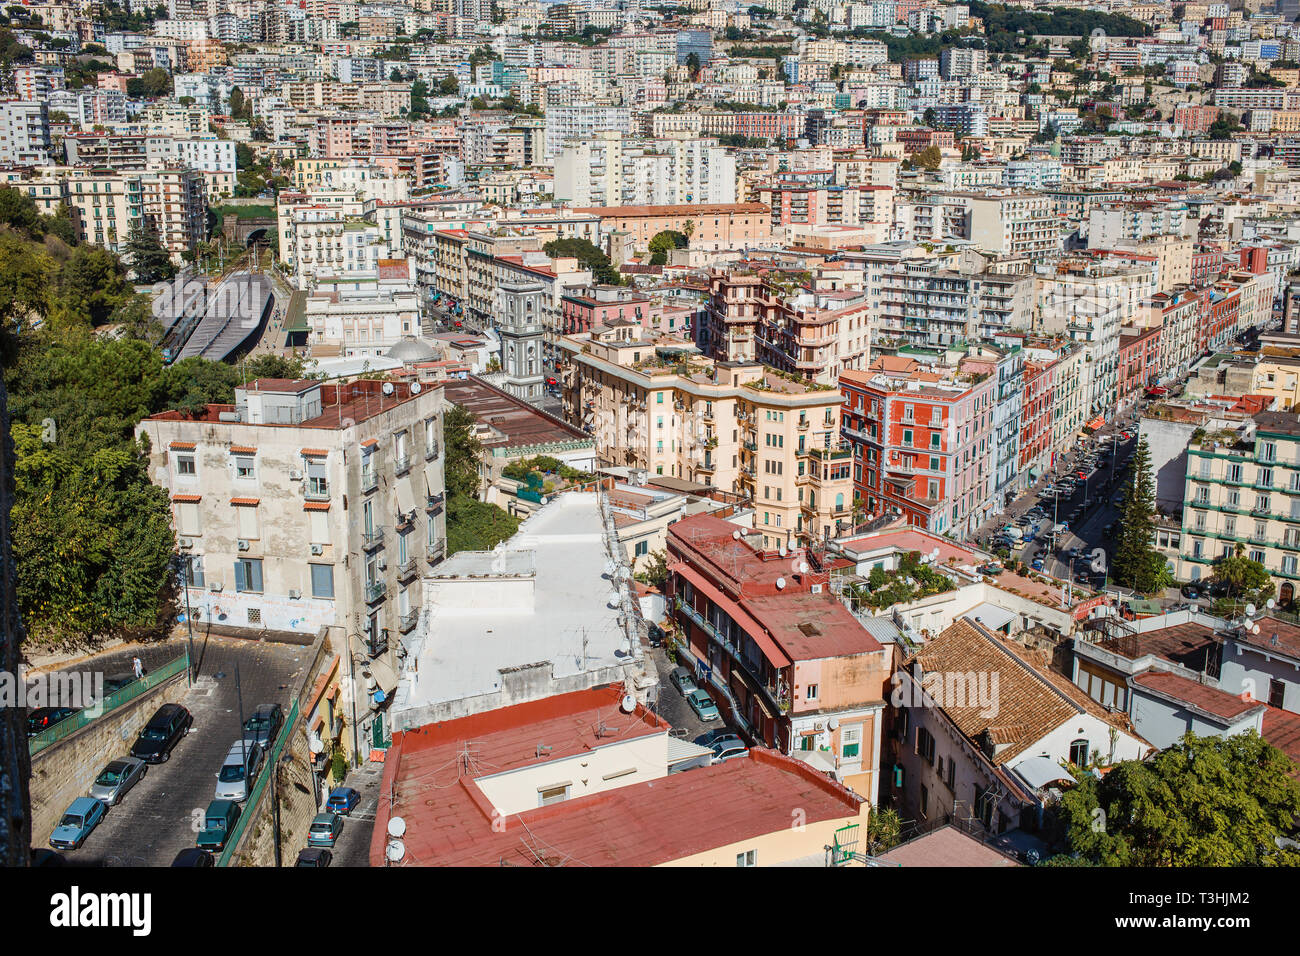 Naples, Italy cityscape. View on city colorful rooftops Stock Photo